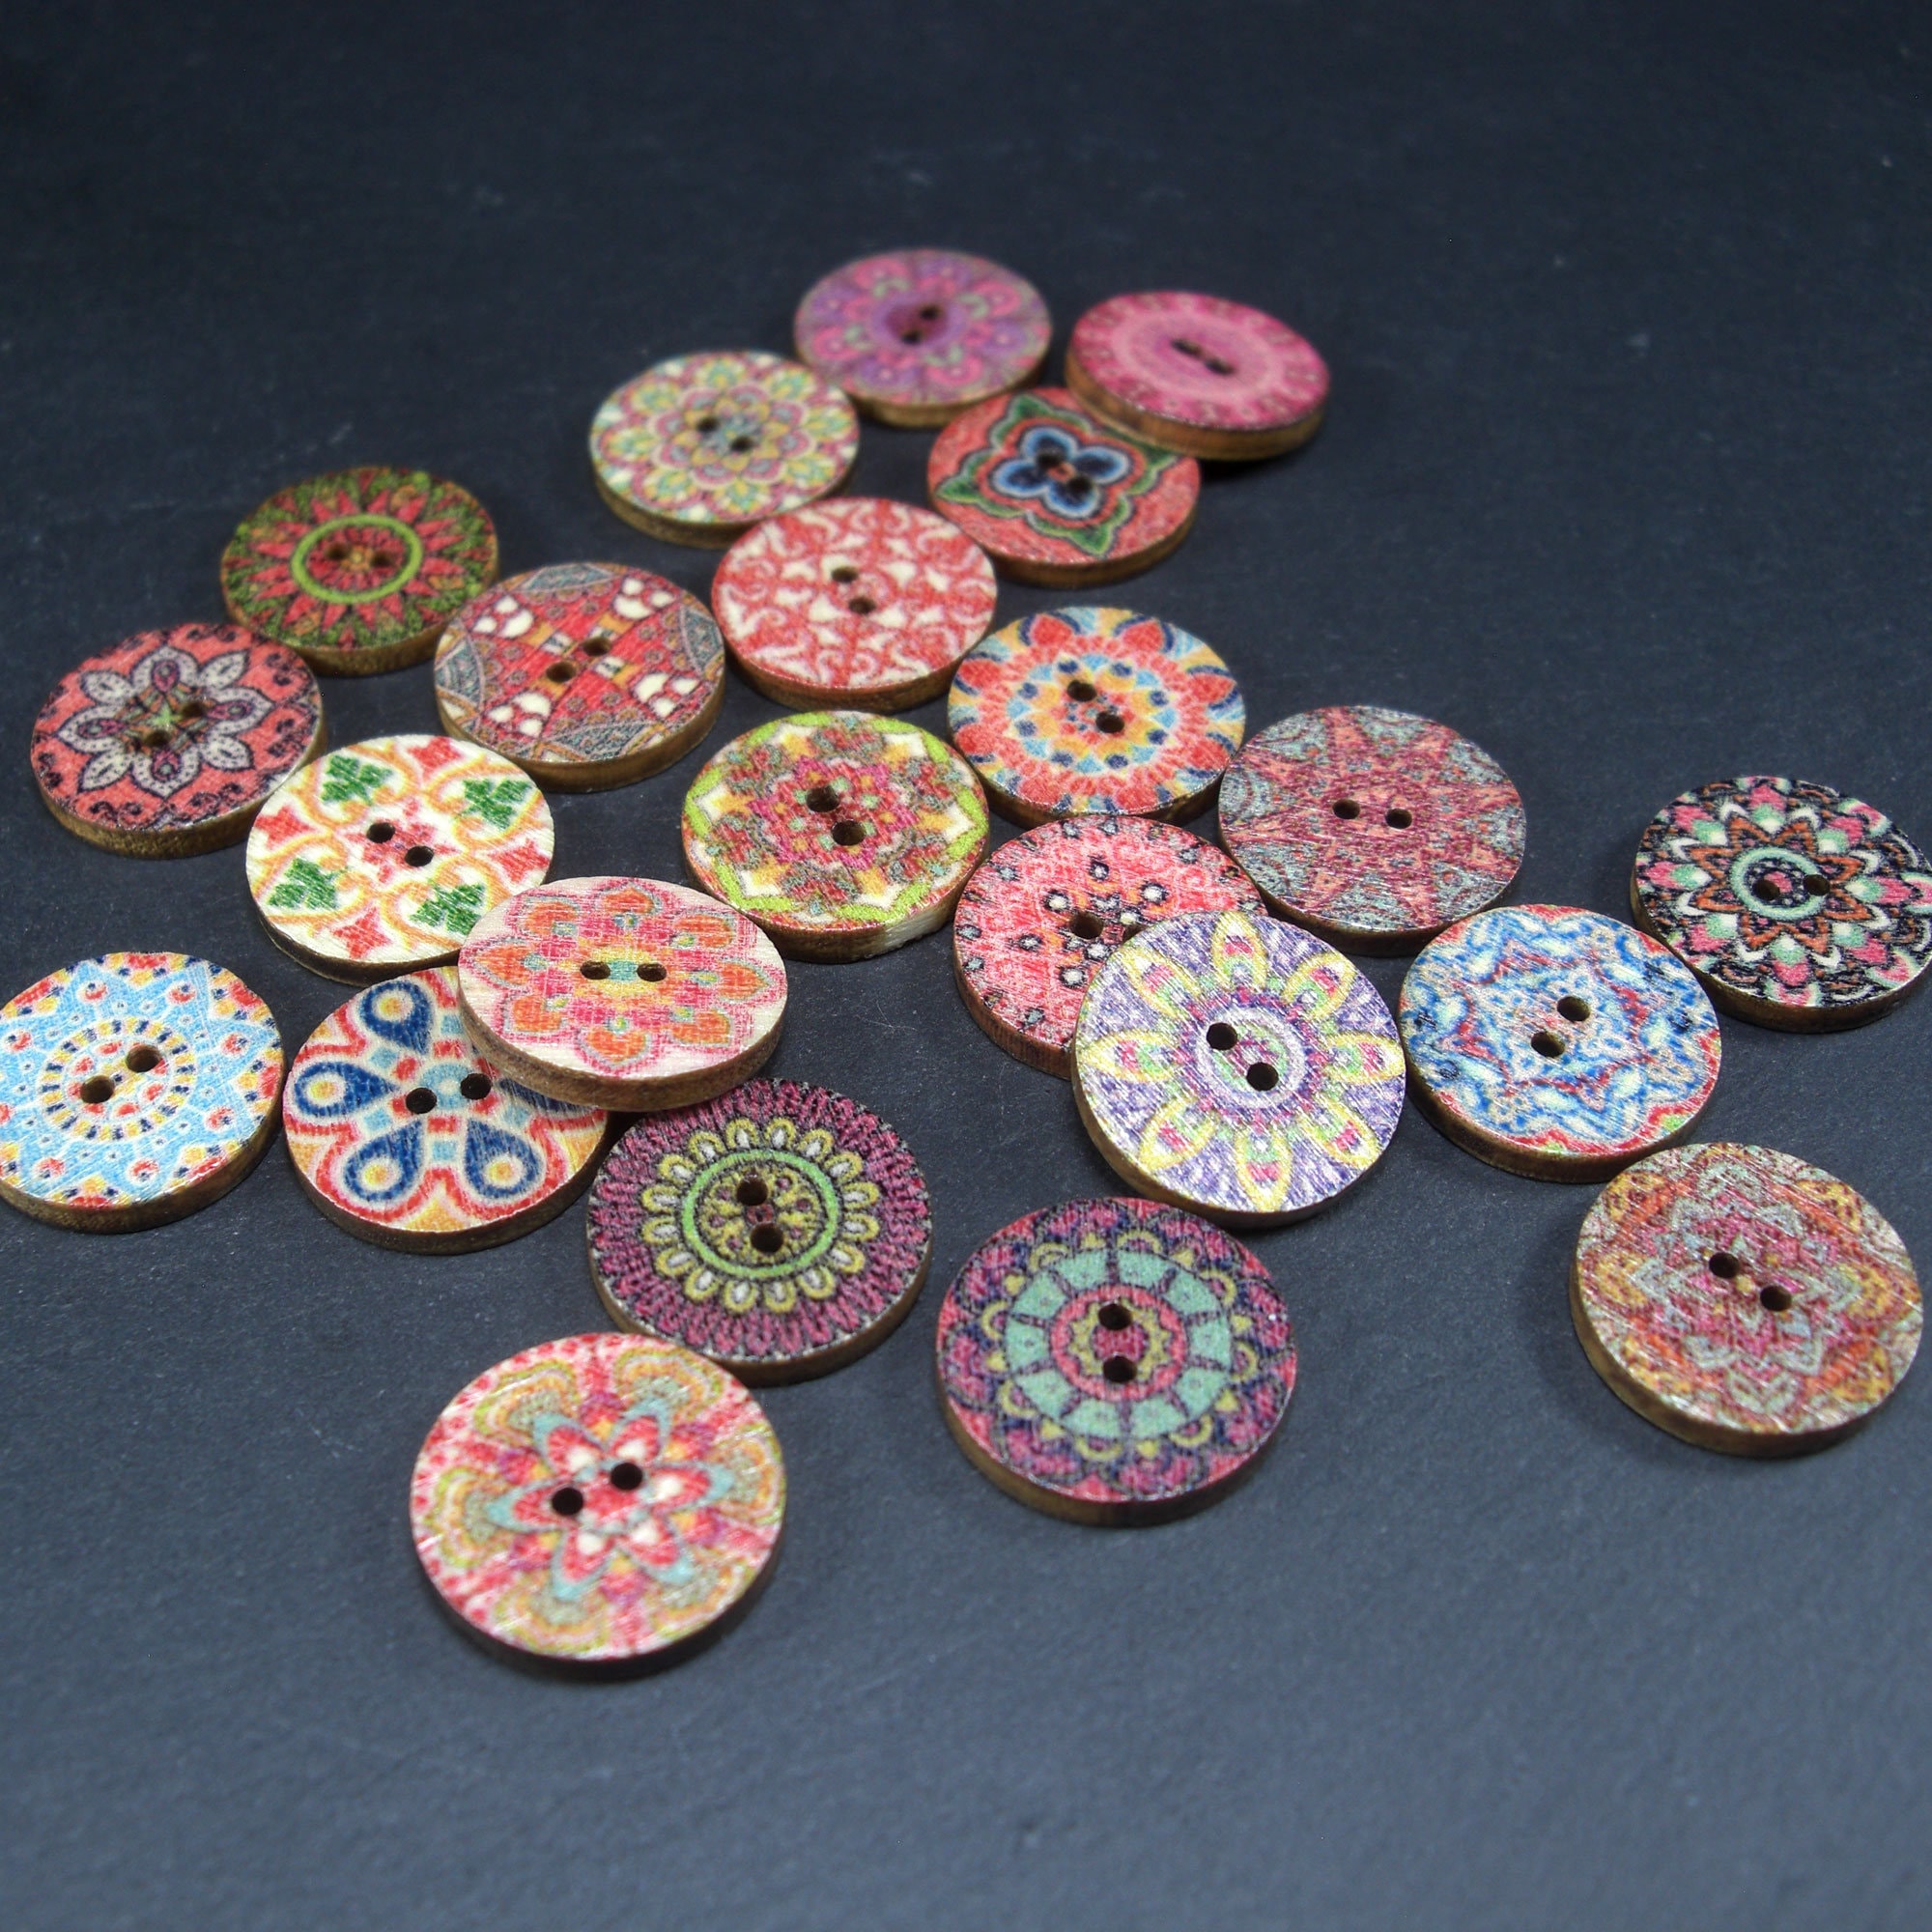 Brown Buttons, 10mm Buttons, Wooden Buttons, Rustic Buttons, Sewing  Supplies, Scrapbooking, Embellishments 